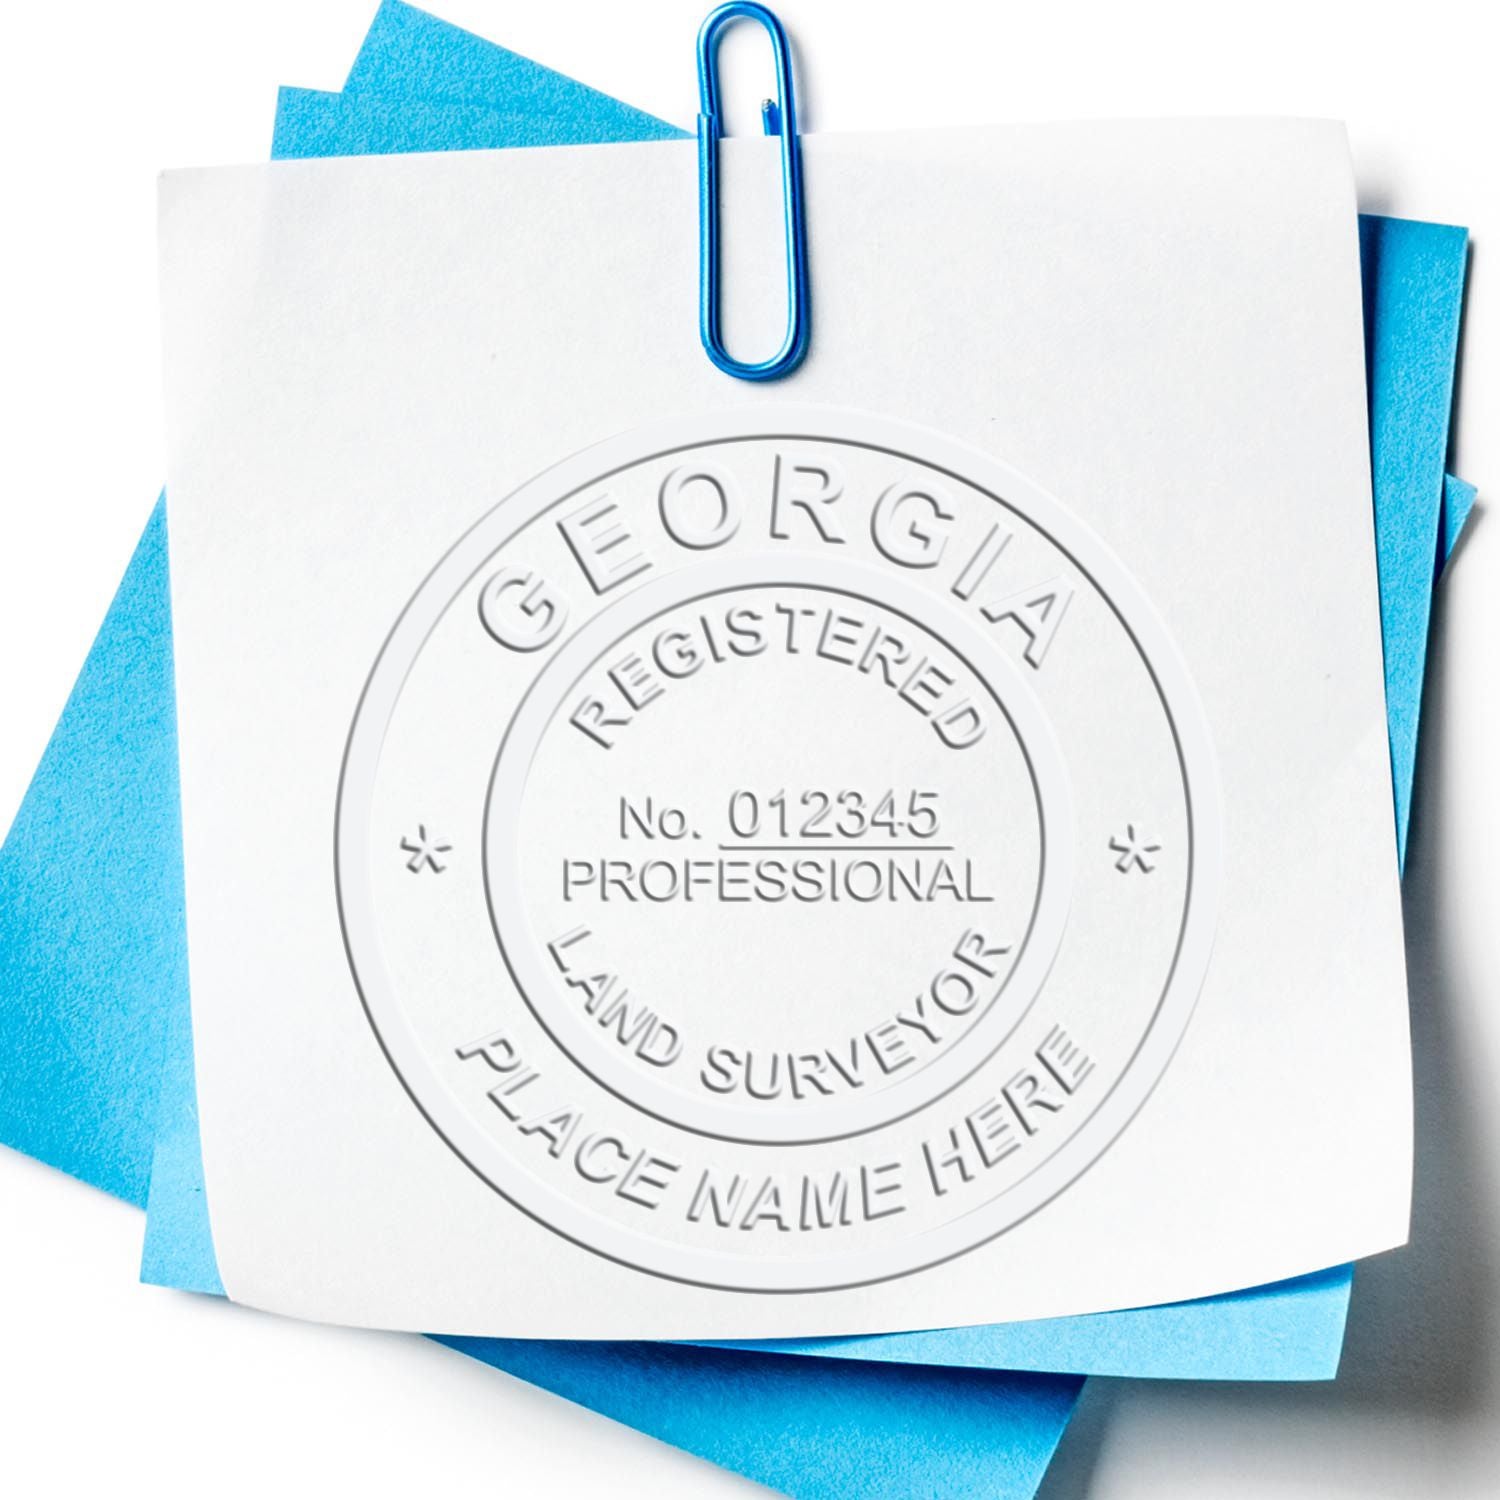 The main image for the Georgia Desk Surveyor Seal Embosser depicting a sample of the imprint and electronic files